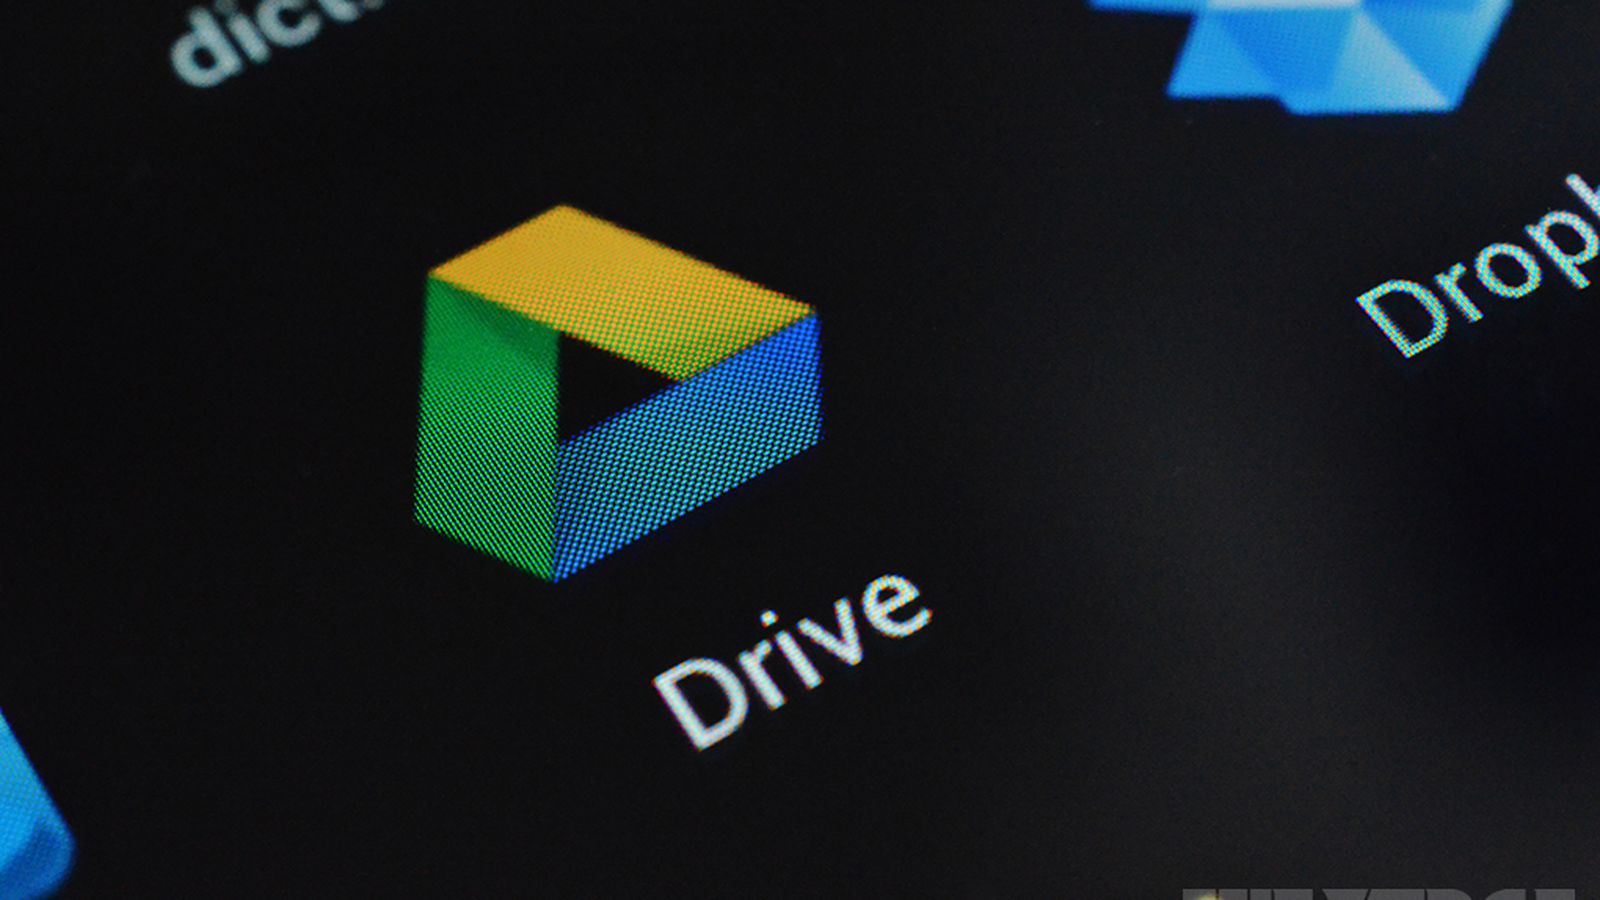 Google Drive officially launches with 5GB free storage ...